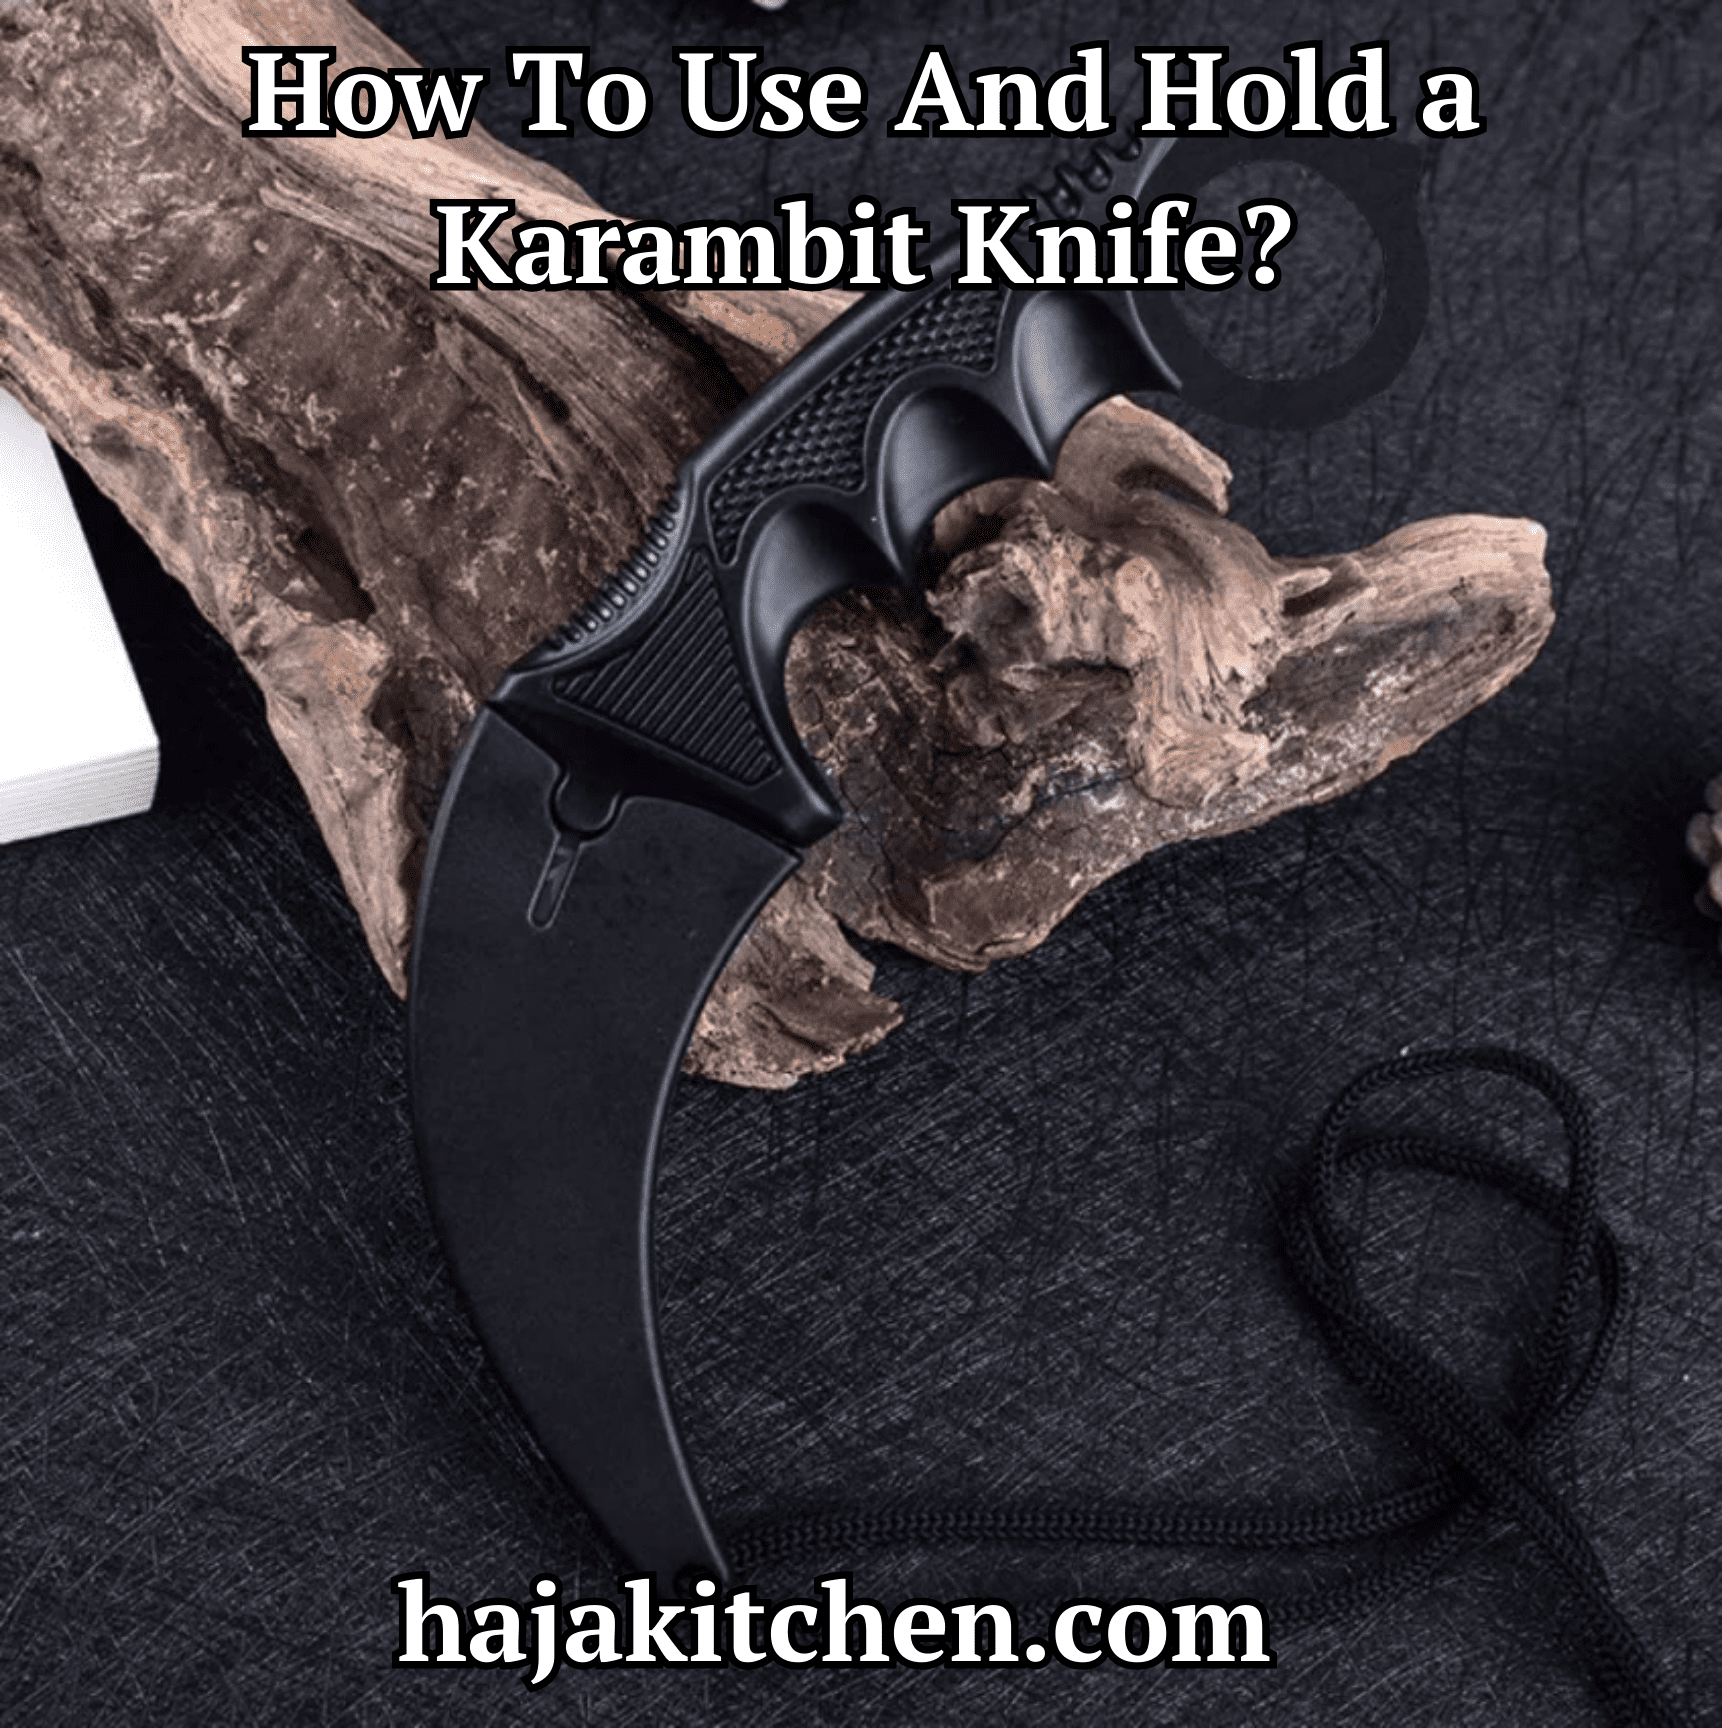 How To Use And Hold a Karambit Knife